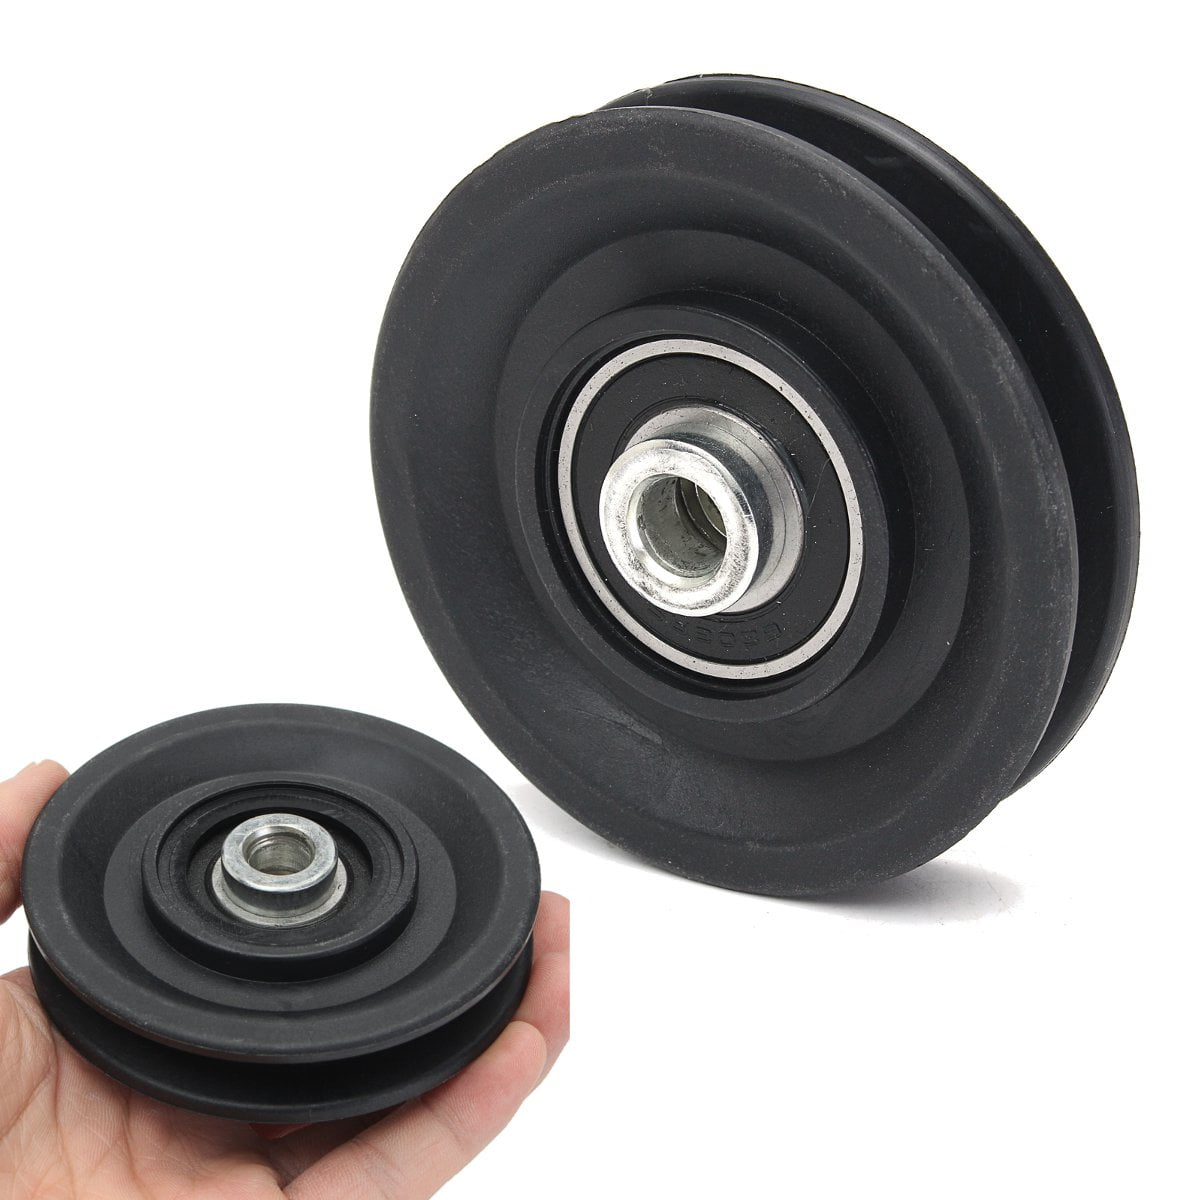 90MM Nylon Bearing Pulley Wheel Cable Gym Fitness Equipment Set Universal 3.5" 